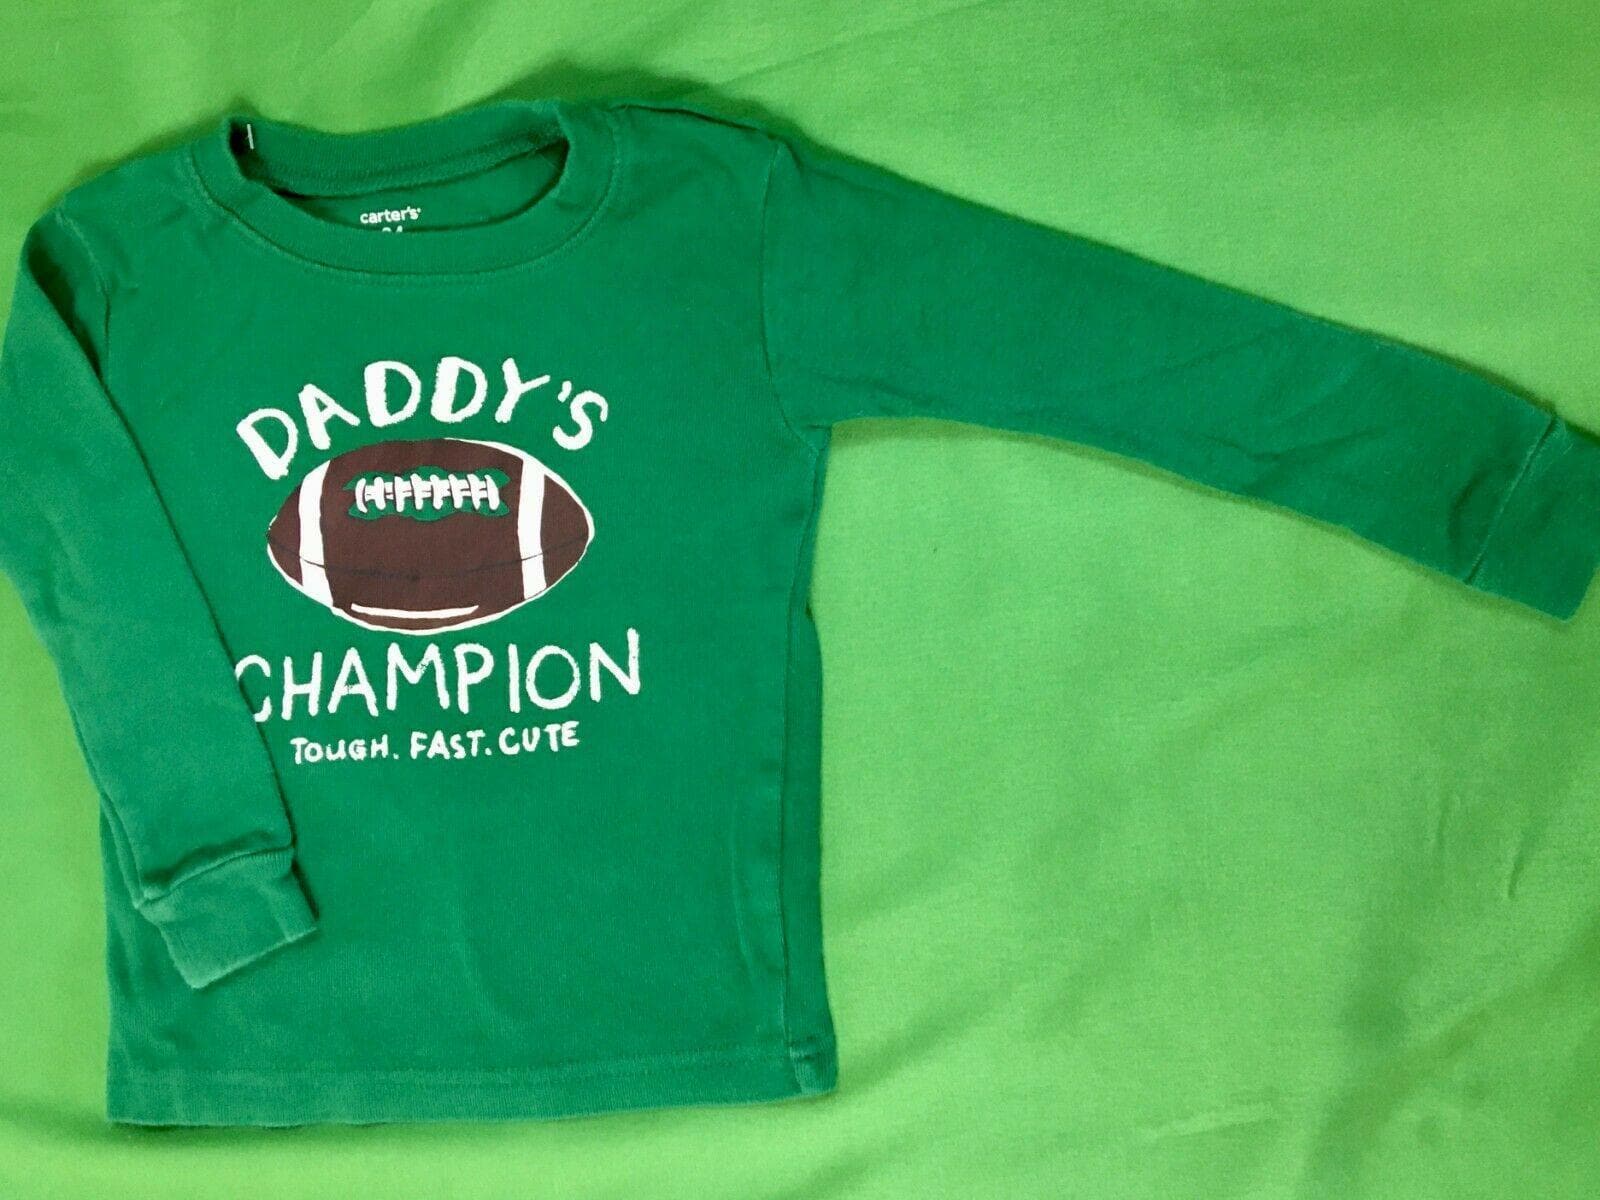 NFL NCAA American Football "Daddy's Champion" L/S T-Shirt Toddler 24 Months